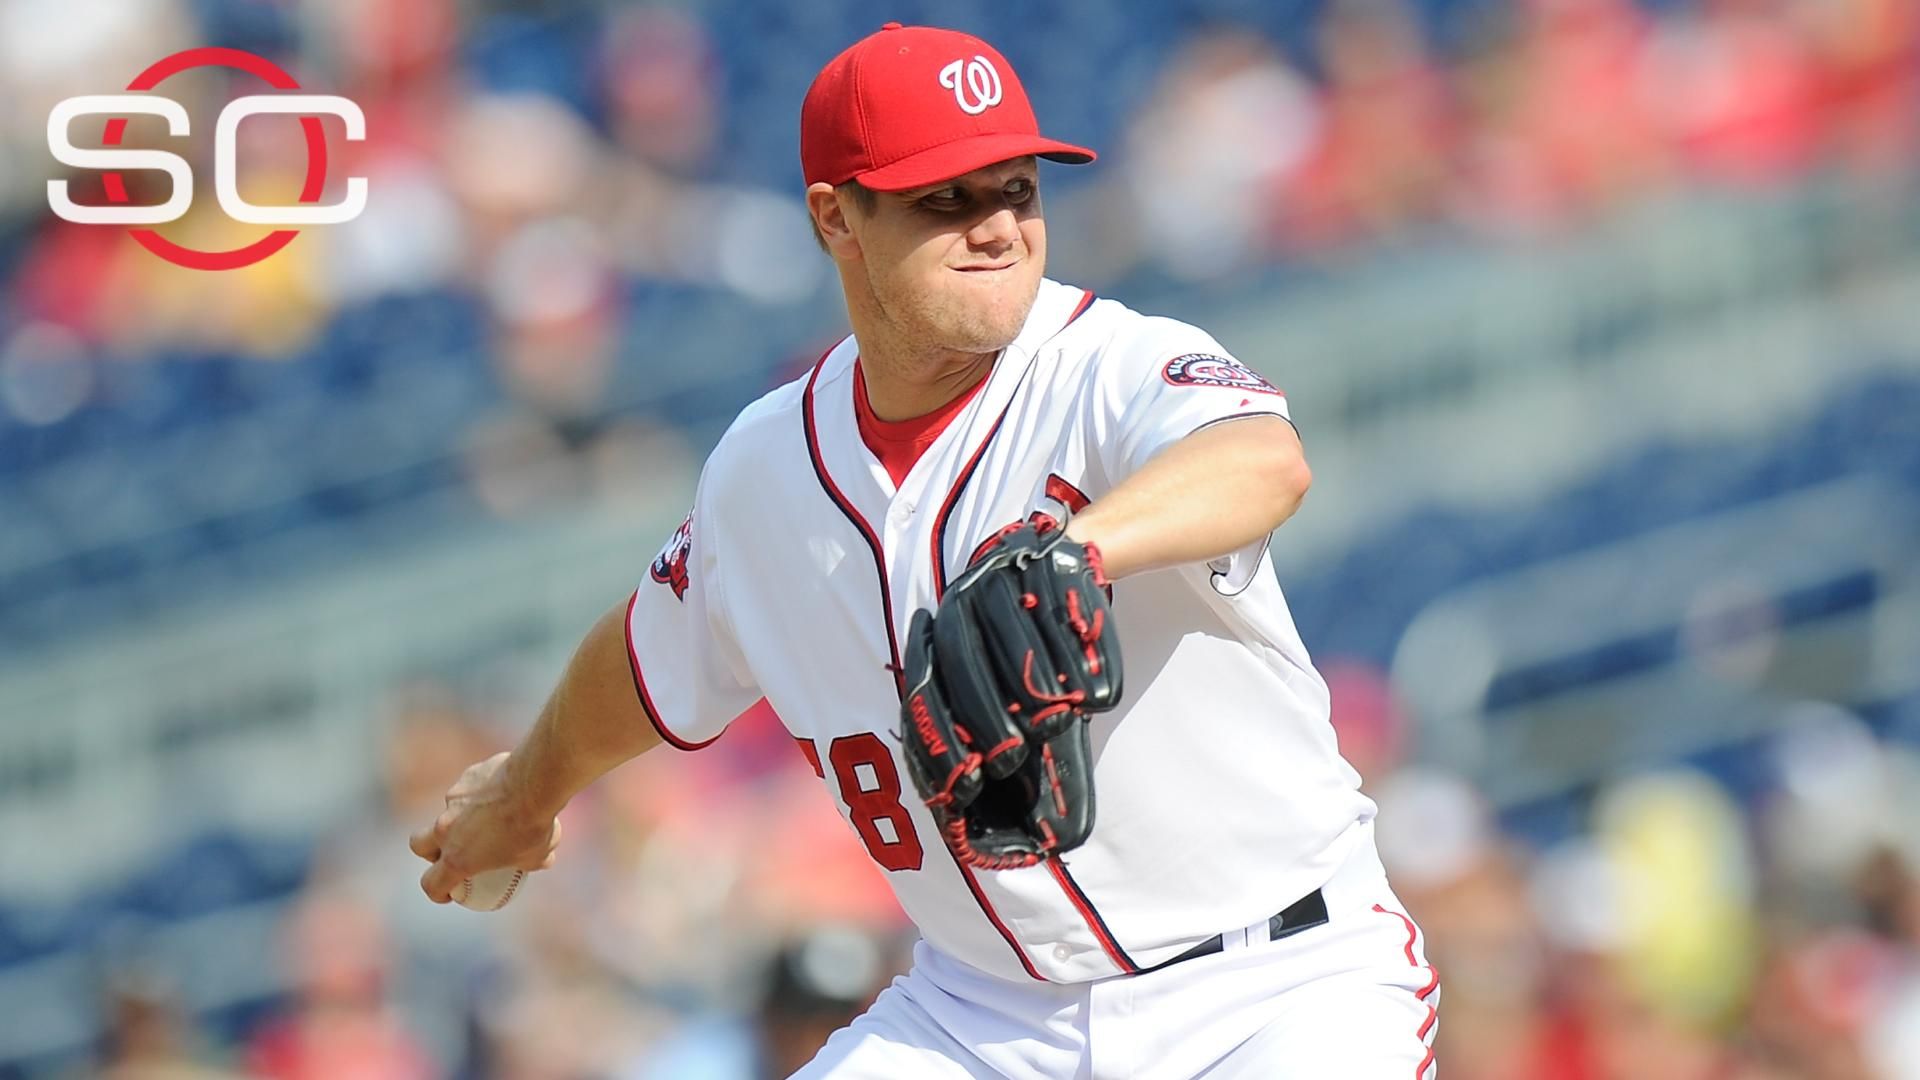 Jonathan Papelbon believes the Phillies are a top 5 team